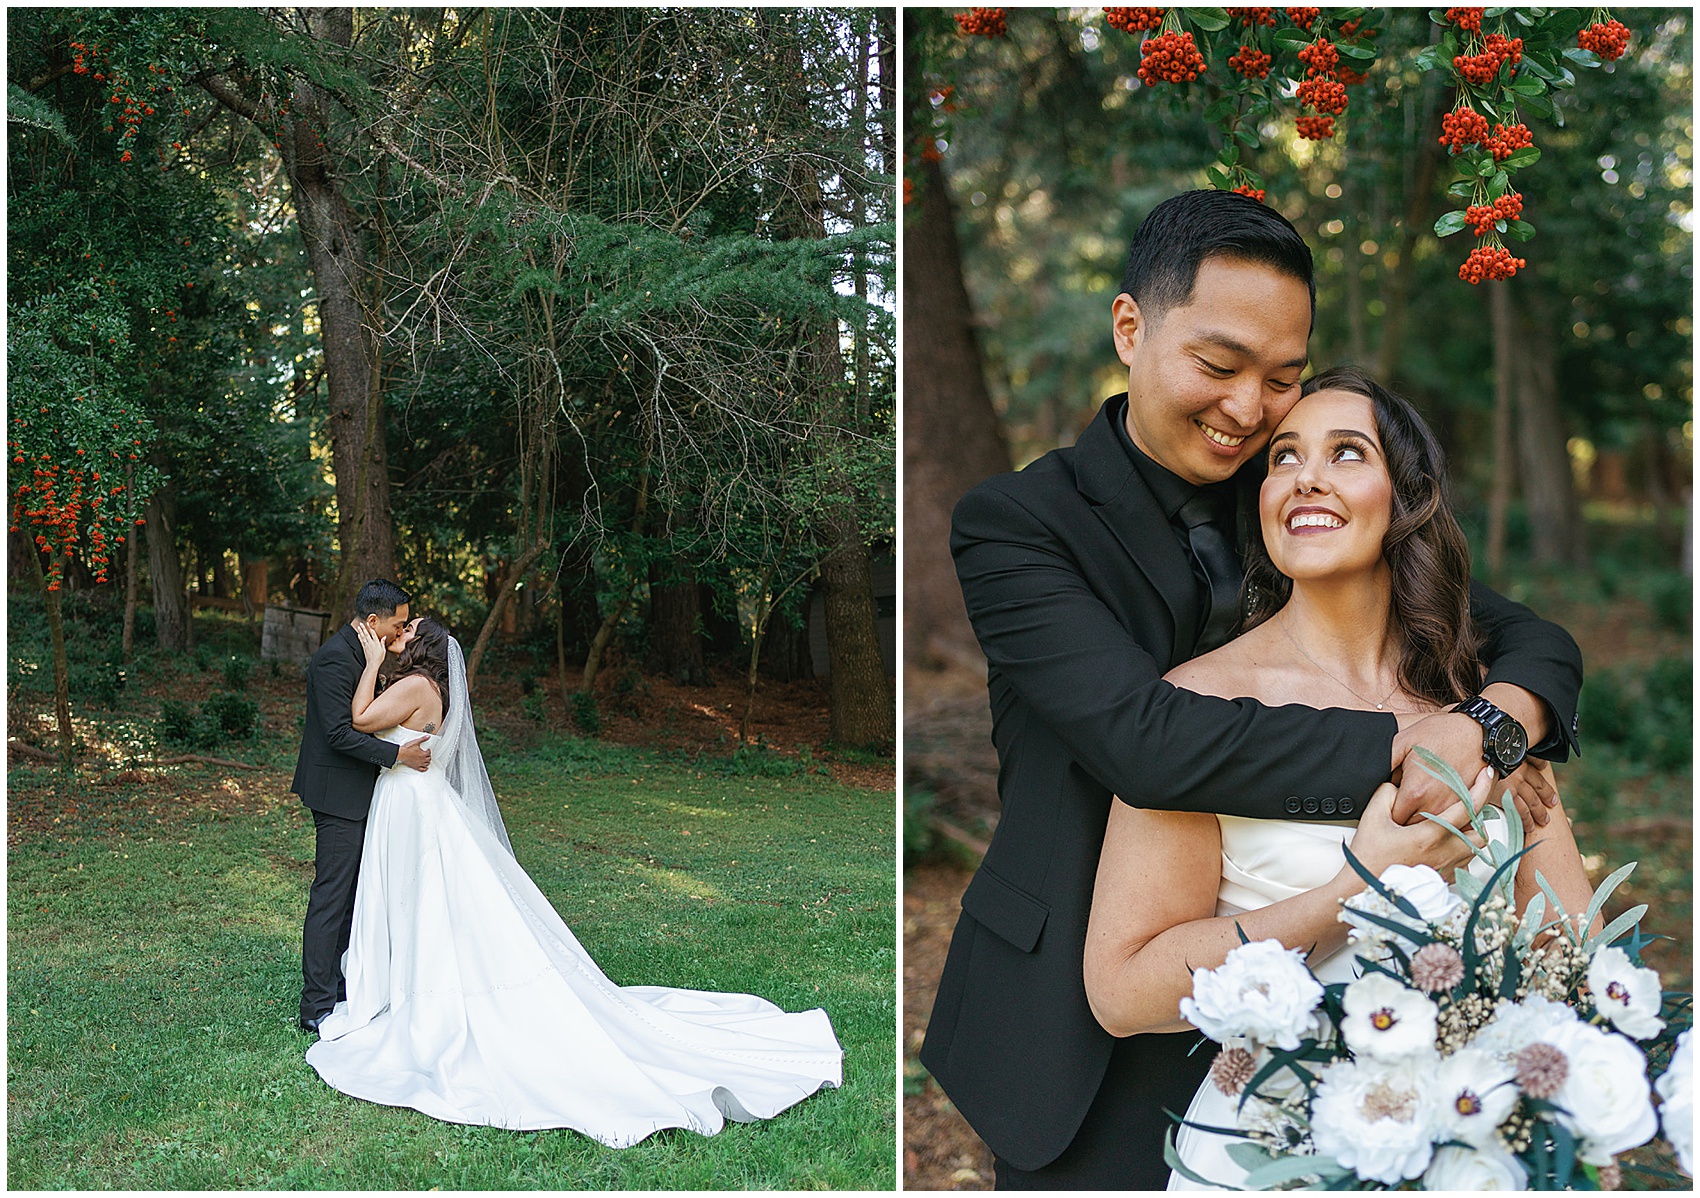 Newlyweds hus and kiss in a forest lawn at the brazilian room tilden park wedding venue